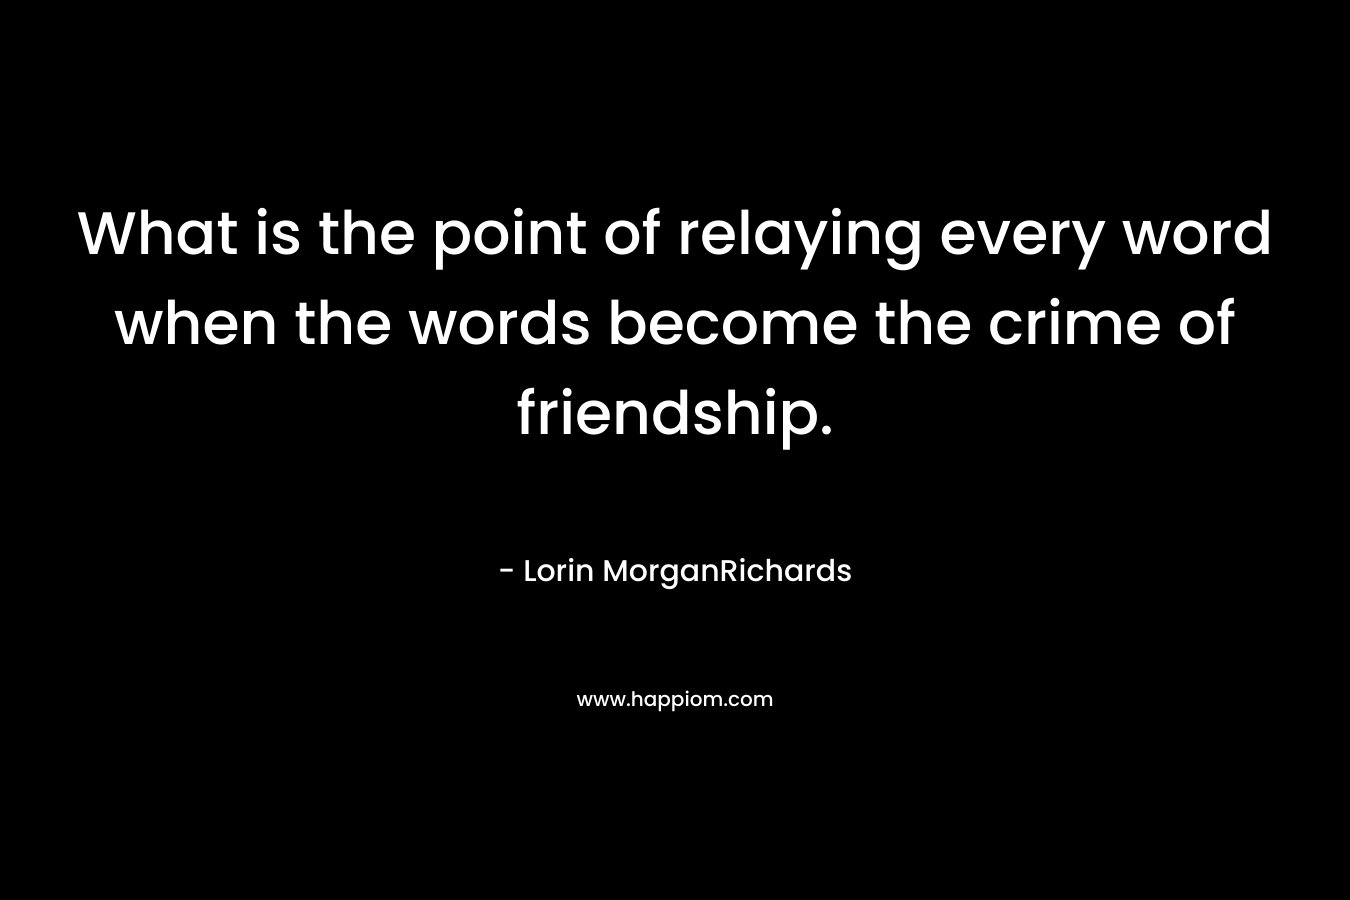 What is the point of relaying every word when the words become the crime of friendship.